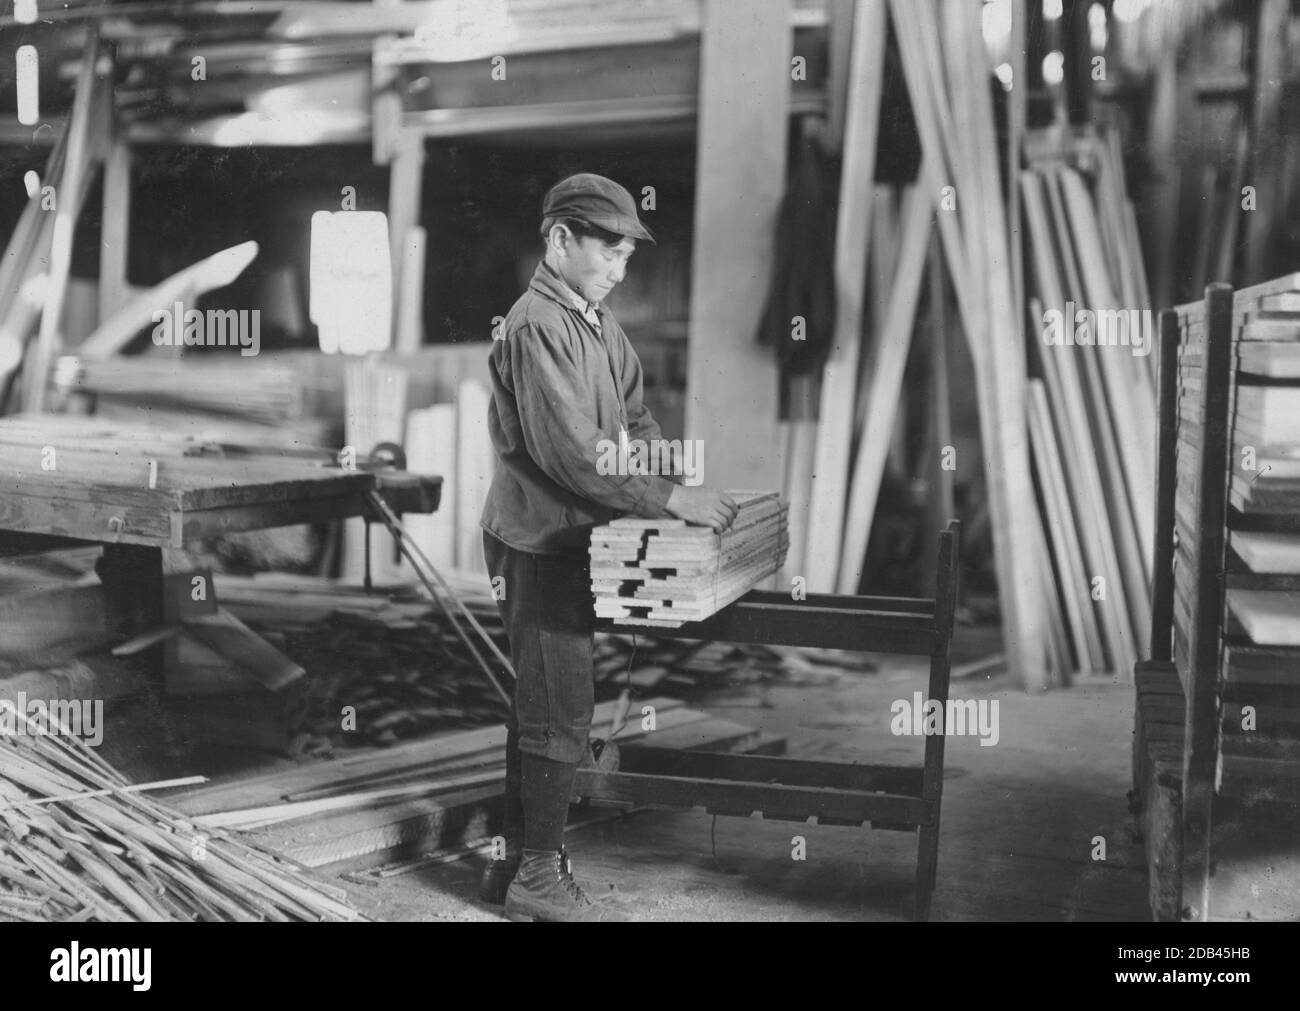 Boy probably about 13 years old, tying strips which he has taken away from the planer. Schultze Waltum Co., Planing Mill. Stock Photo